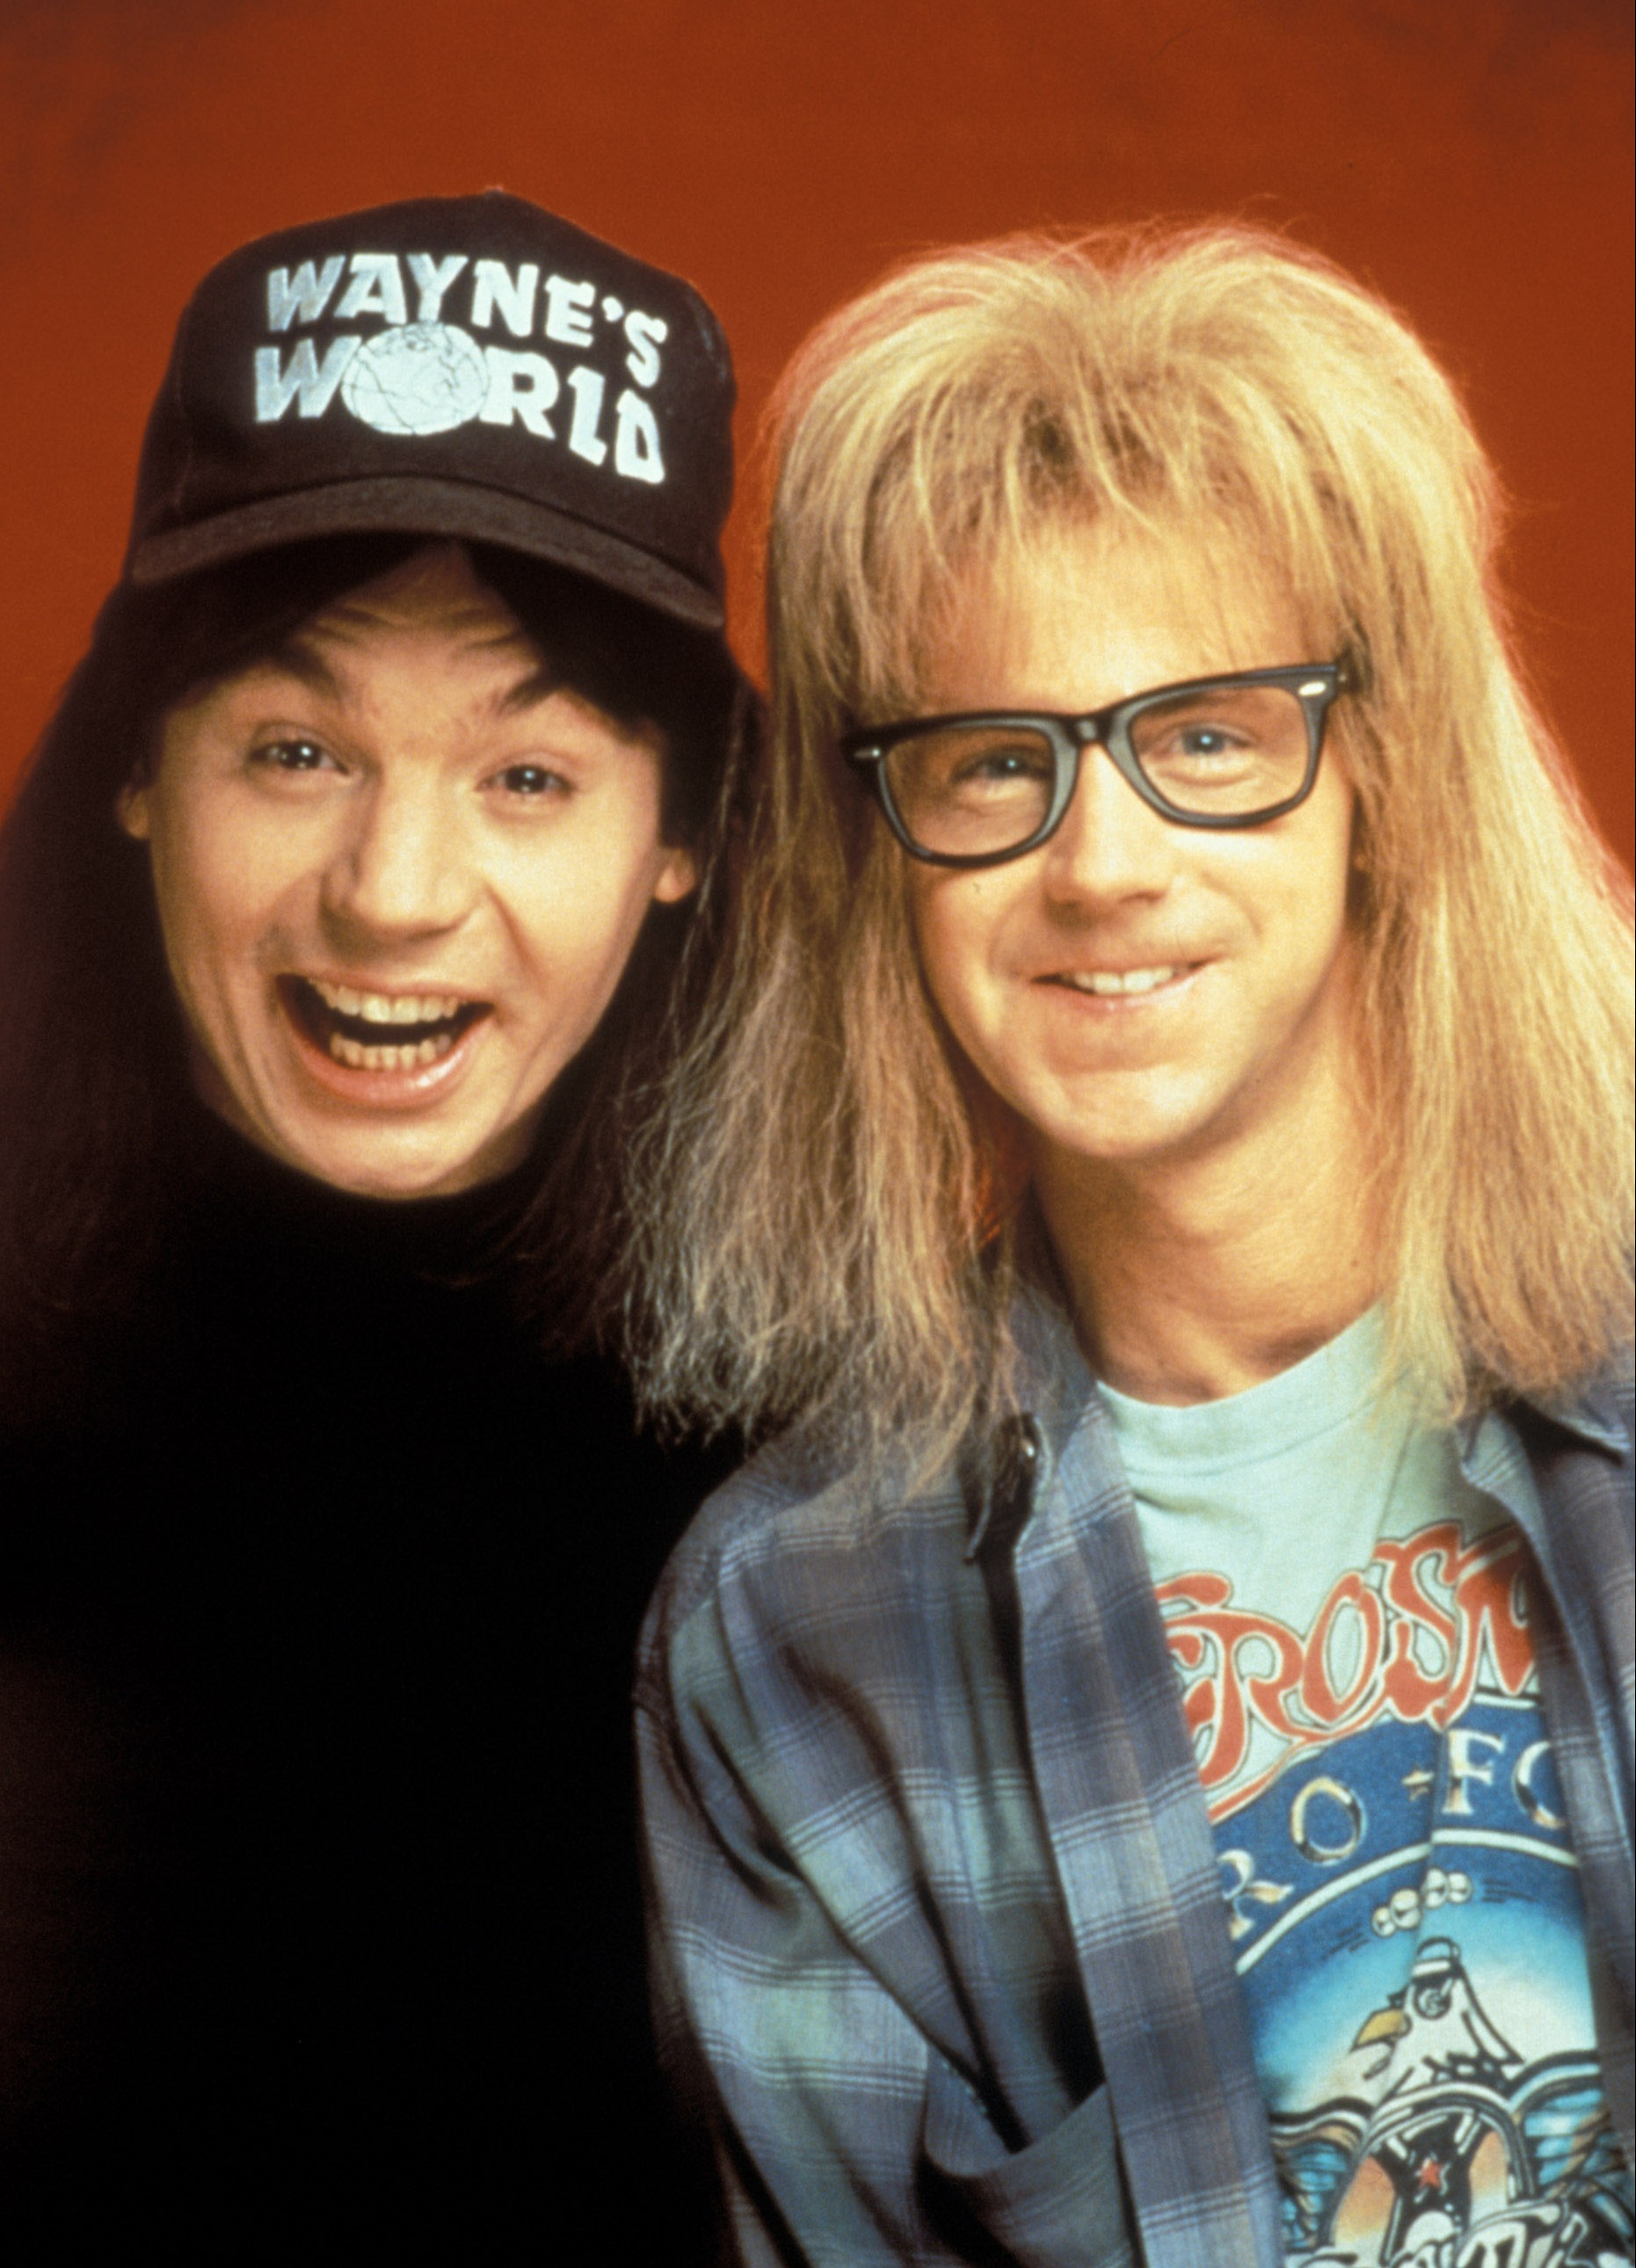 He also starred in Wayne’s World in 1992